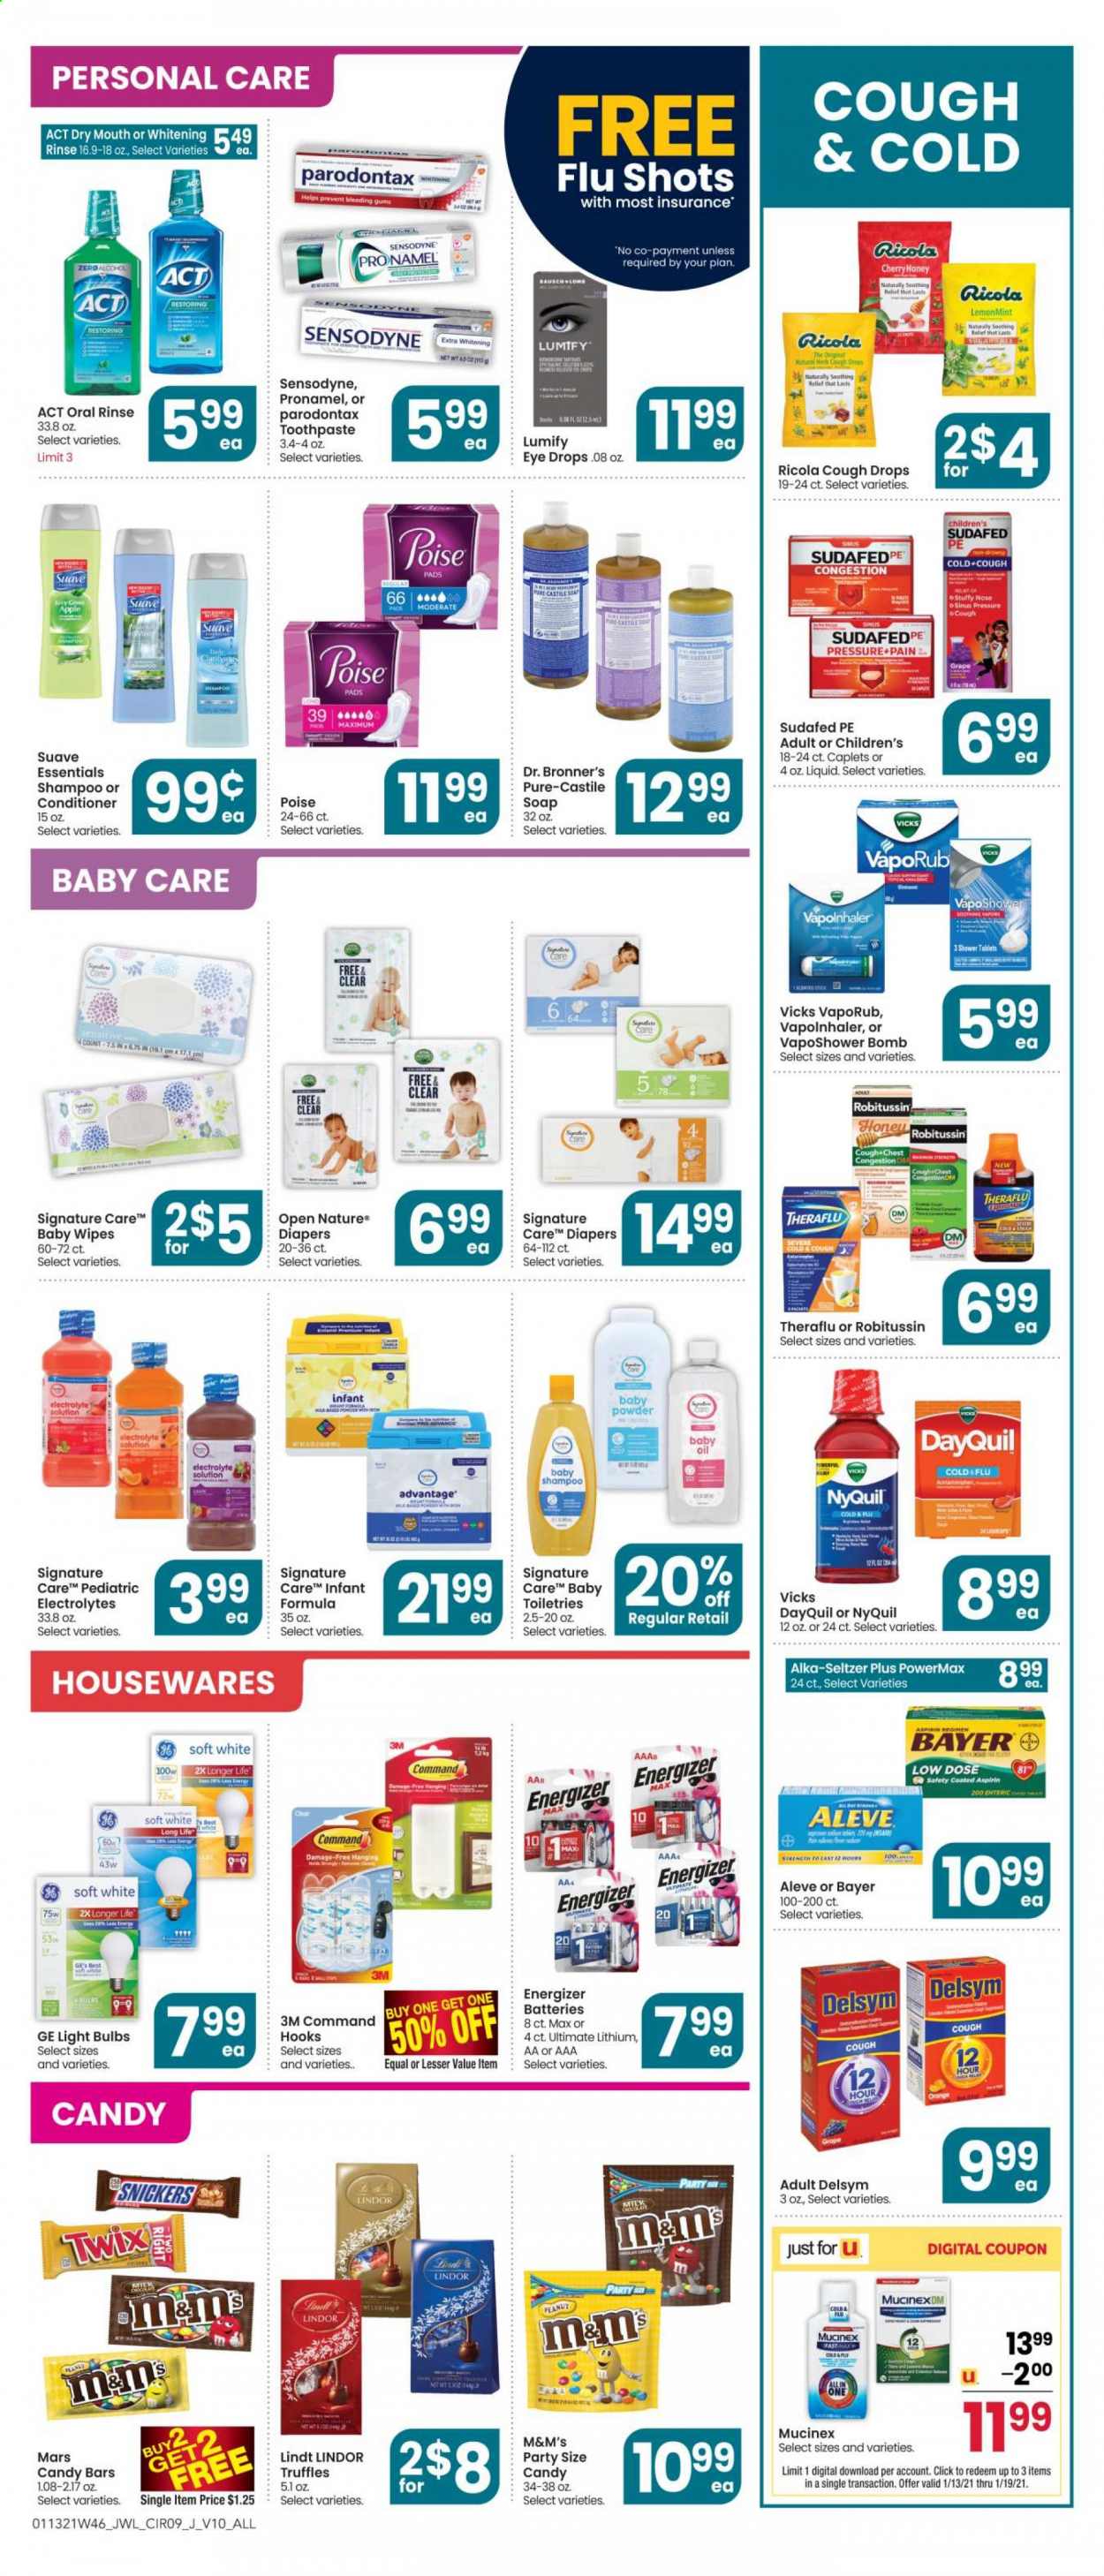 thumbnail - Jewel Osco Flyer - 01/13/2021 - 01/19/2021 - Sales products - milk, ricola, Lindt, Lindor, Snickers, Twix, Mars, truffles, M&M's, herbs, peanuts, seltzer water, baby wipes, baby powder, baby oil, wipes, shampoo, Suave, soap, toothpaste, Sensodyne, conditioner, Vicks, hook, Aleve, Clear Care, DayQuil, Delsym, Cold & Flu, Mucinex, Robitussin, Sudafed, Theraflu, NyQuil, Lumify, eye drops, Alka-seltzer, VapoRub, cough drops, Low Dose, aspirin, Bayer. Page 9.